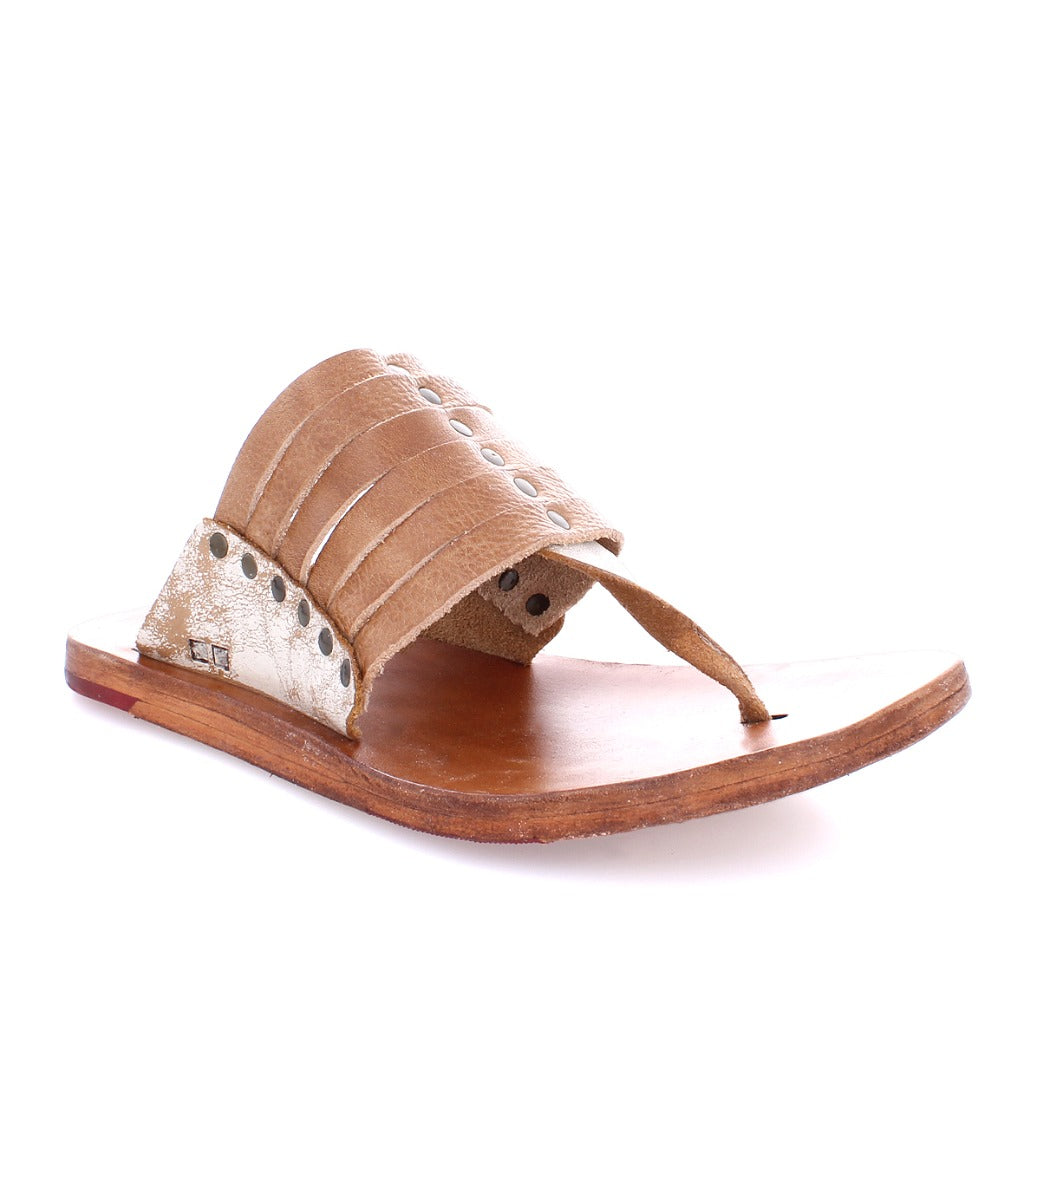 A women's Nemesis sandal with studded details by Bed Stu.